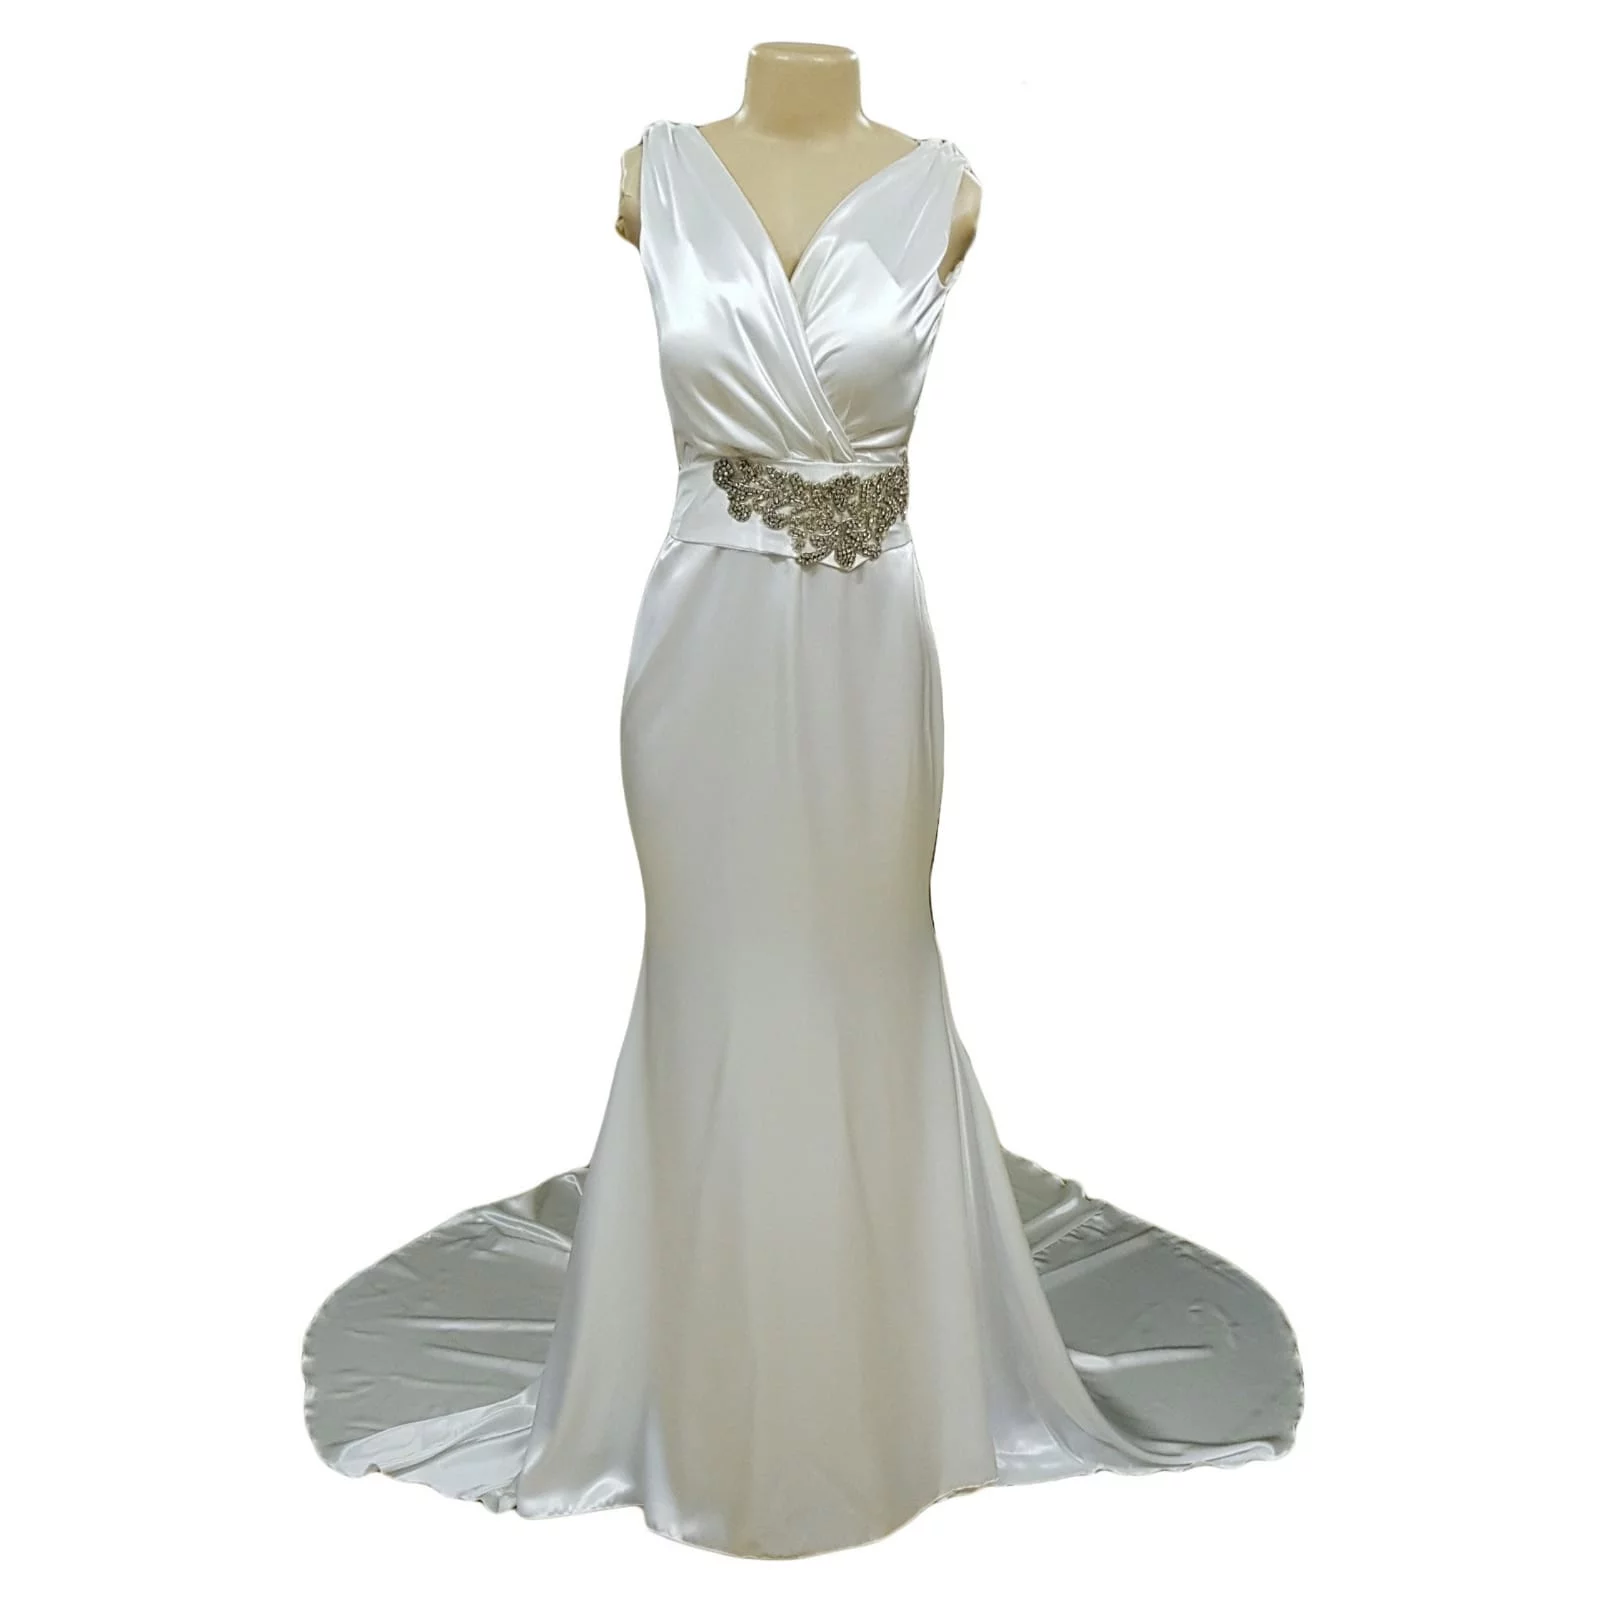 White satin soft mermaid wedding dress with silver belt detail 6 white satin soft mermaid wedding dress, cross busted neckline, open cowl neck back. Angled belt with diamante detail. Train with train hookup.